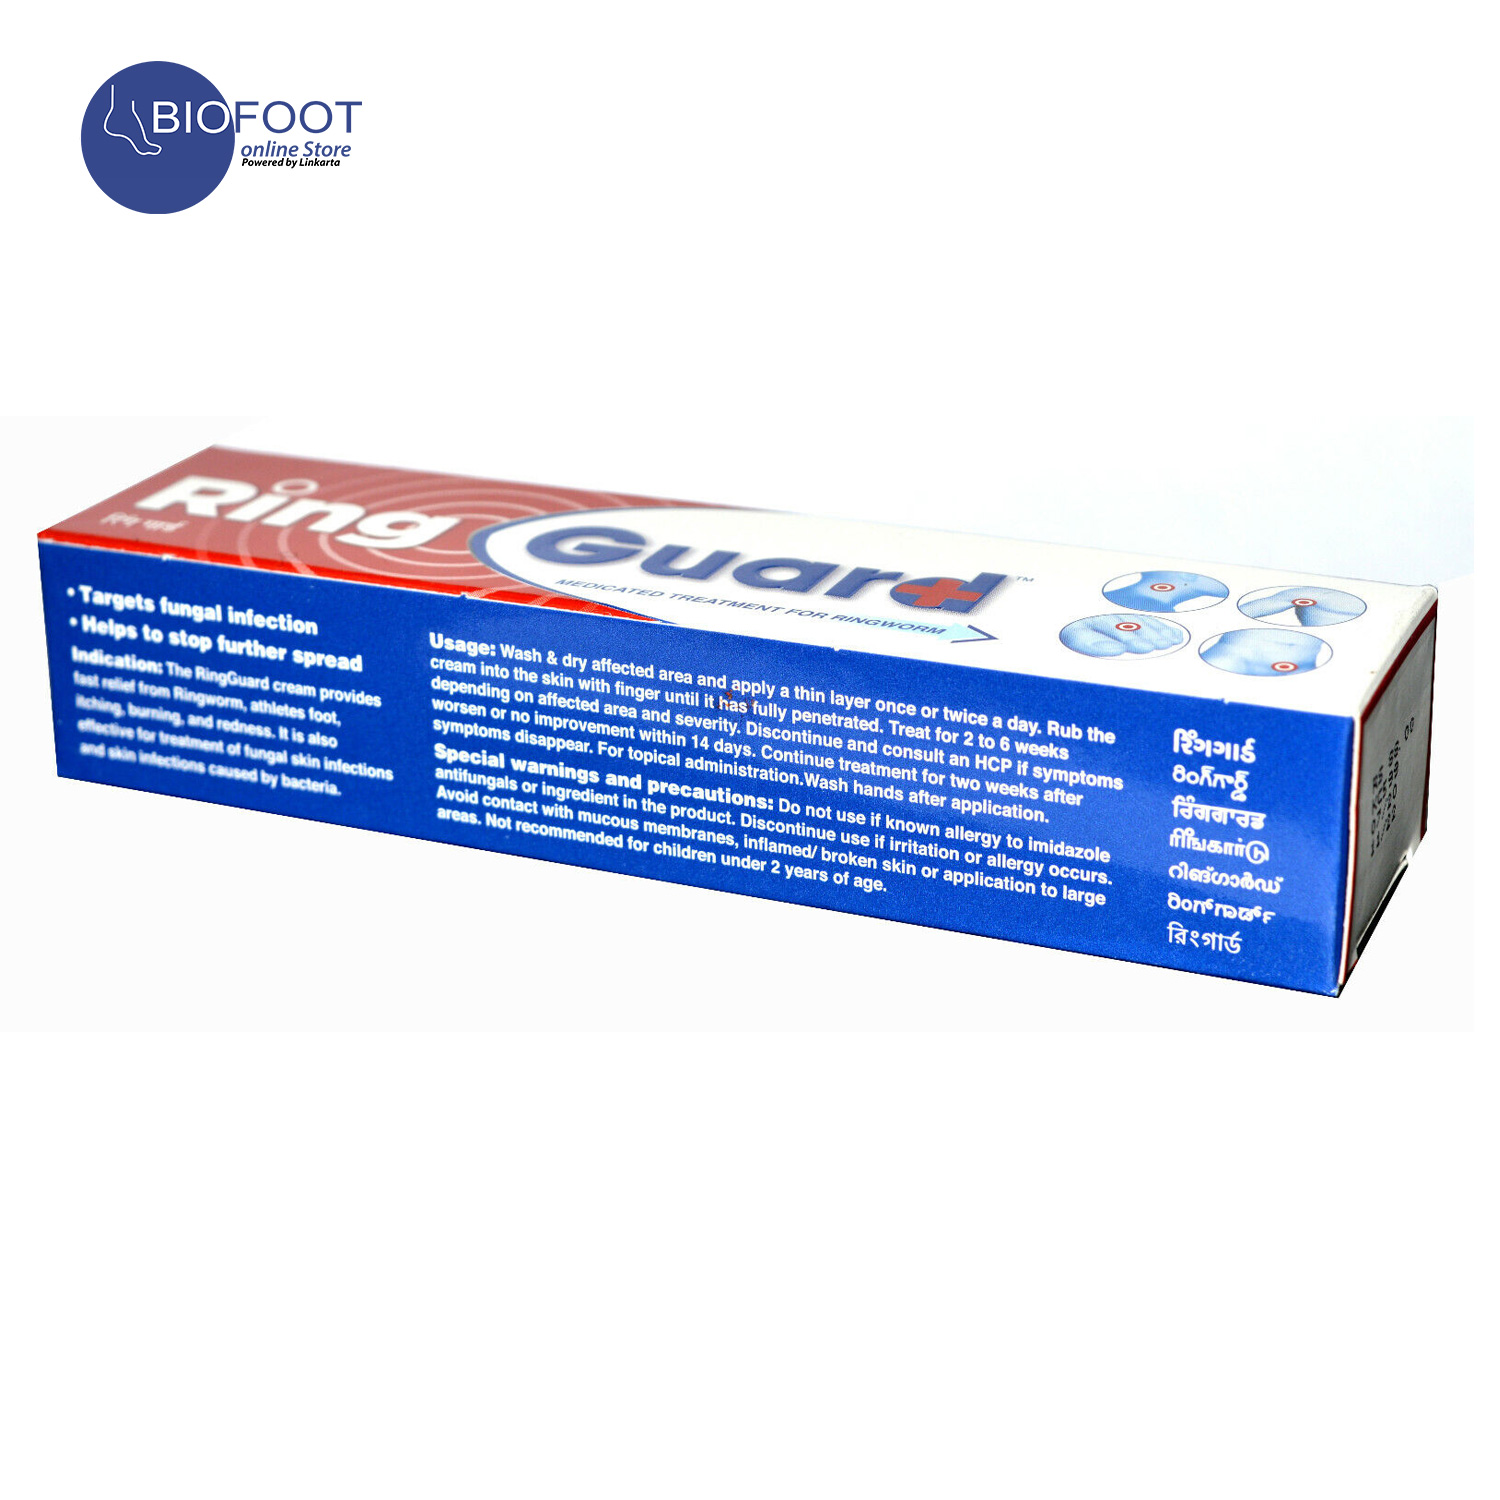 Ring Guard Anti Fungal Medicated Cream For Ringworm And Skin Infection Gel  10 GM - Pack of 2 price in Nepal